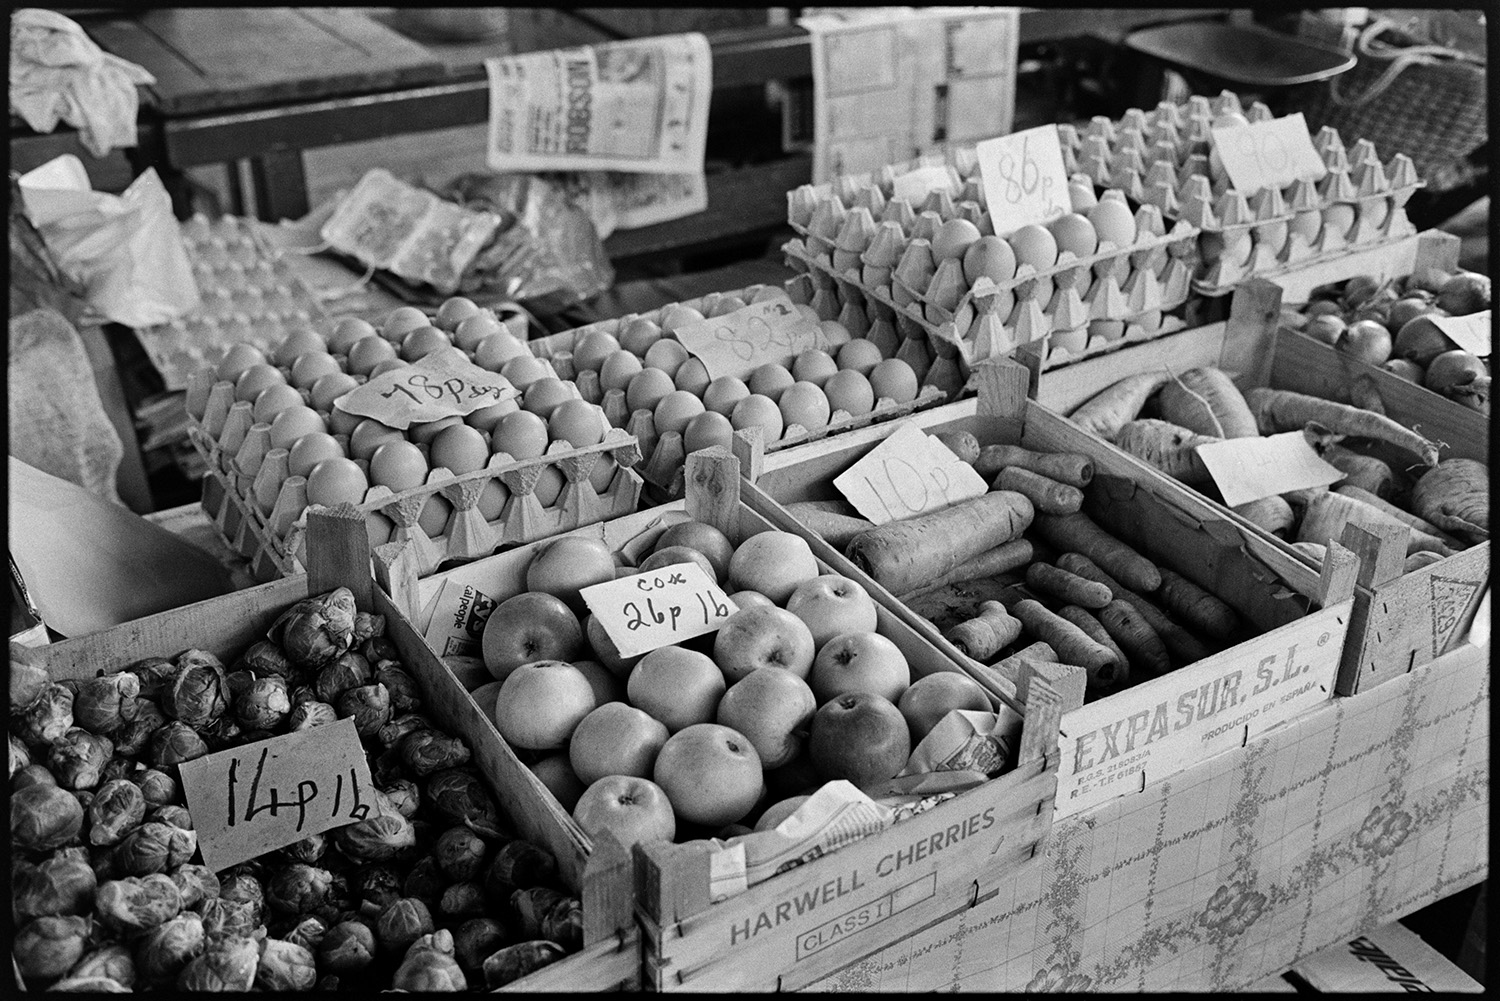 Pannier market, baskets of eggs, vegetables.
[Trays of eggs and boxes of carrots, onions, parsnips, brussel sprouts, and cox apples for sale at Bideford Pannier Market. Price tags are on the produce.]